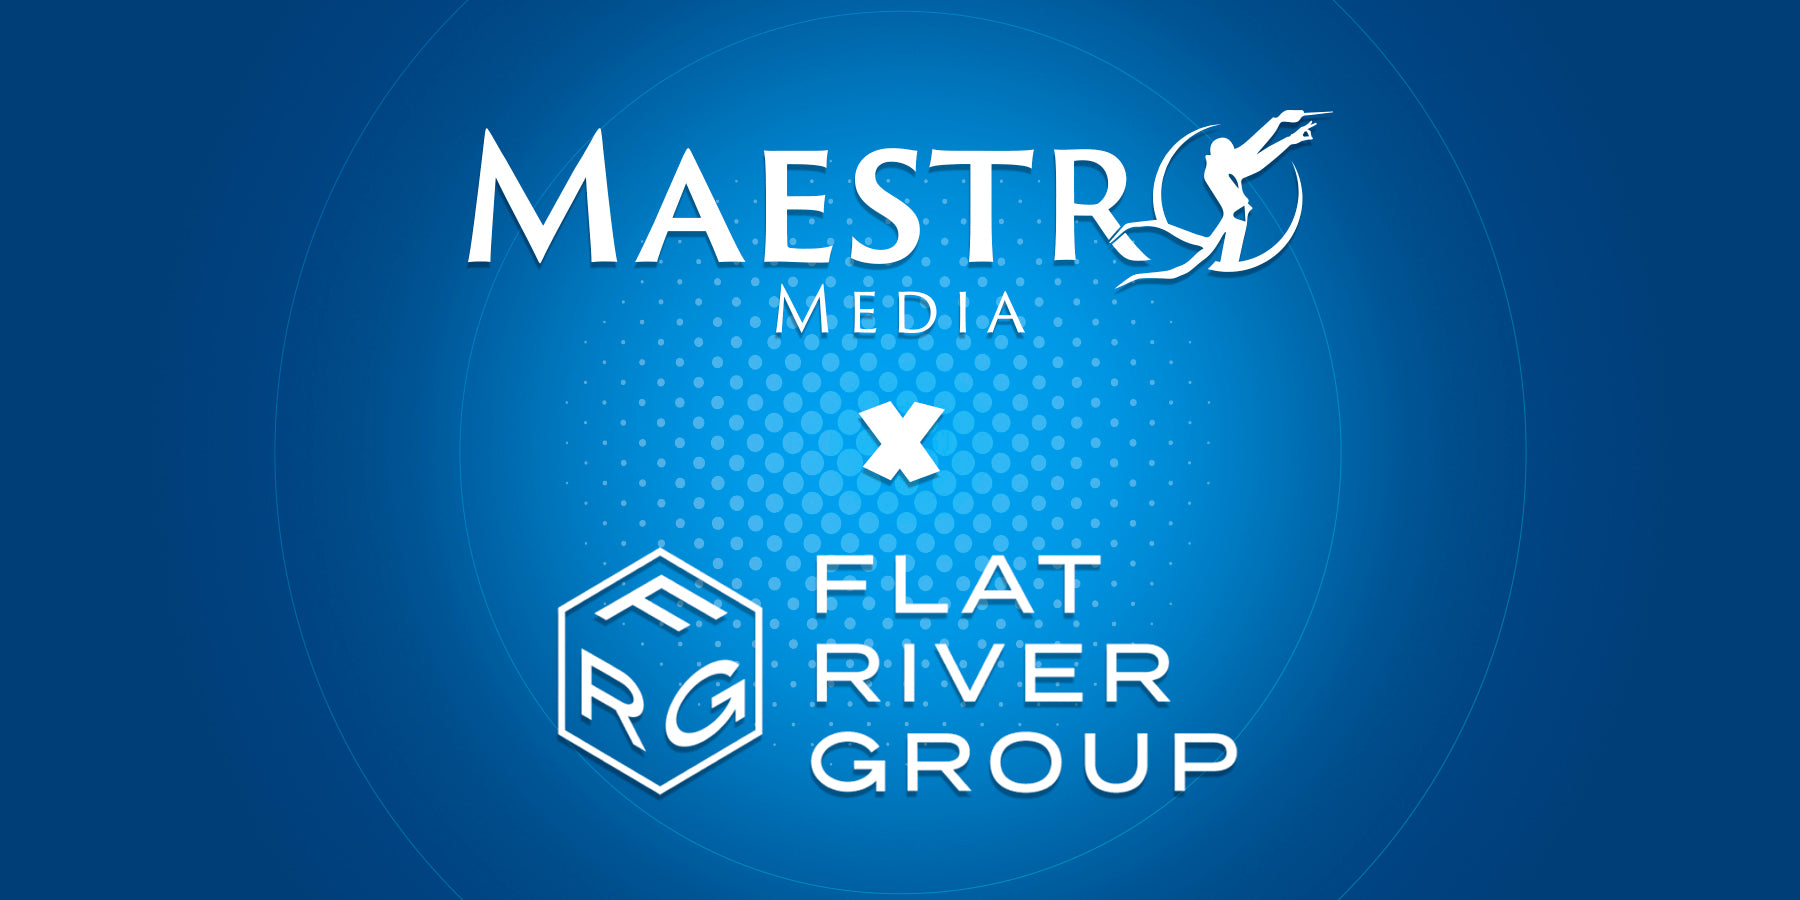 Flat River Group and Maestro Media Forge Strategic Partnership for Worldwide Tabletop Game Distribution